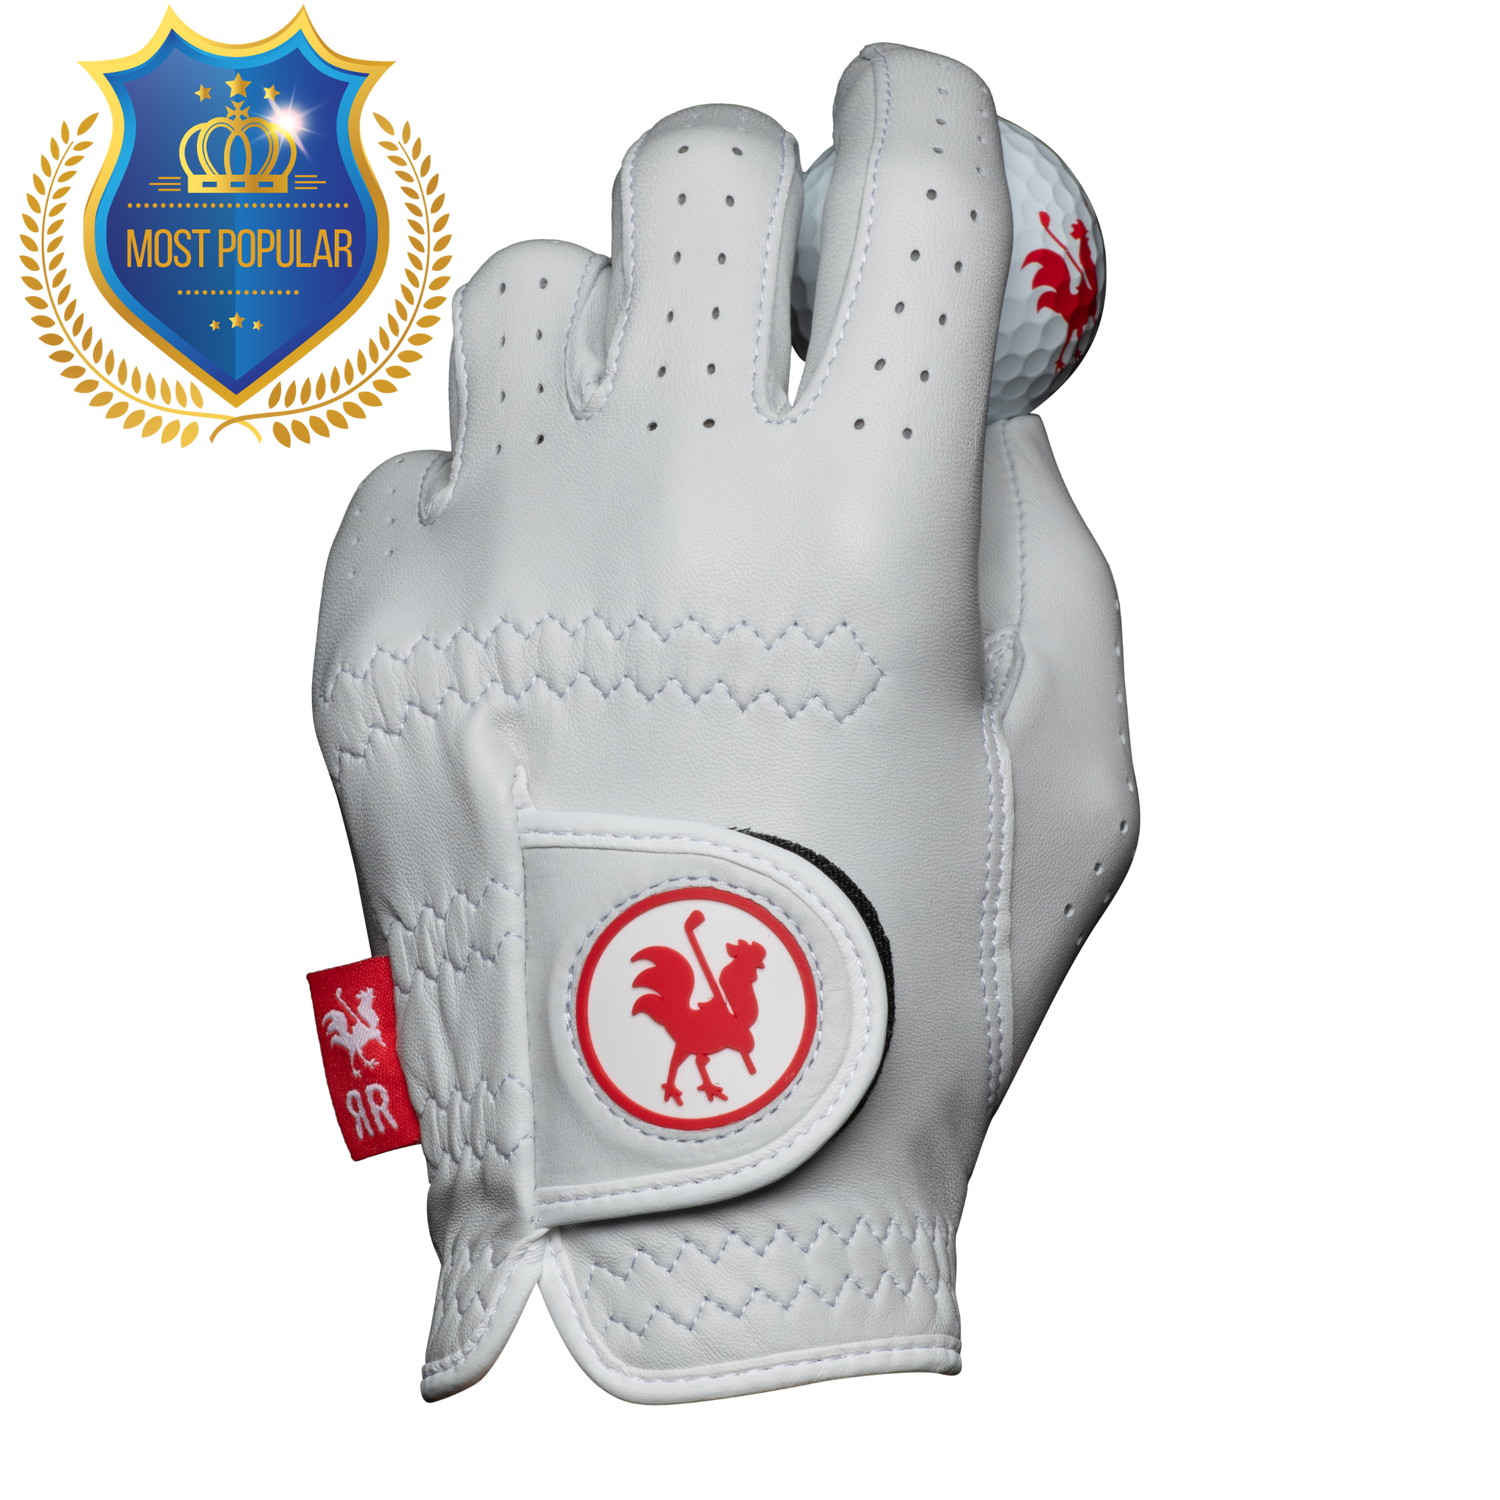 The Feather golf glove